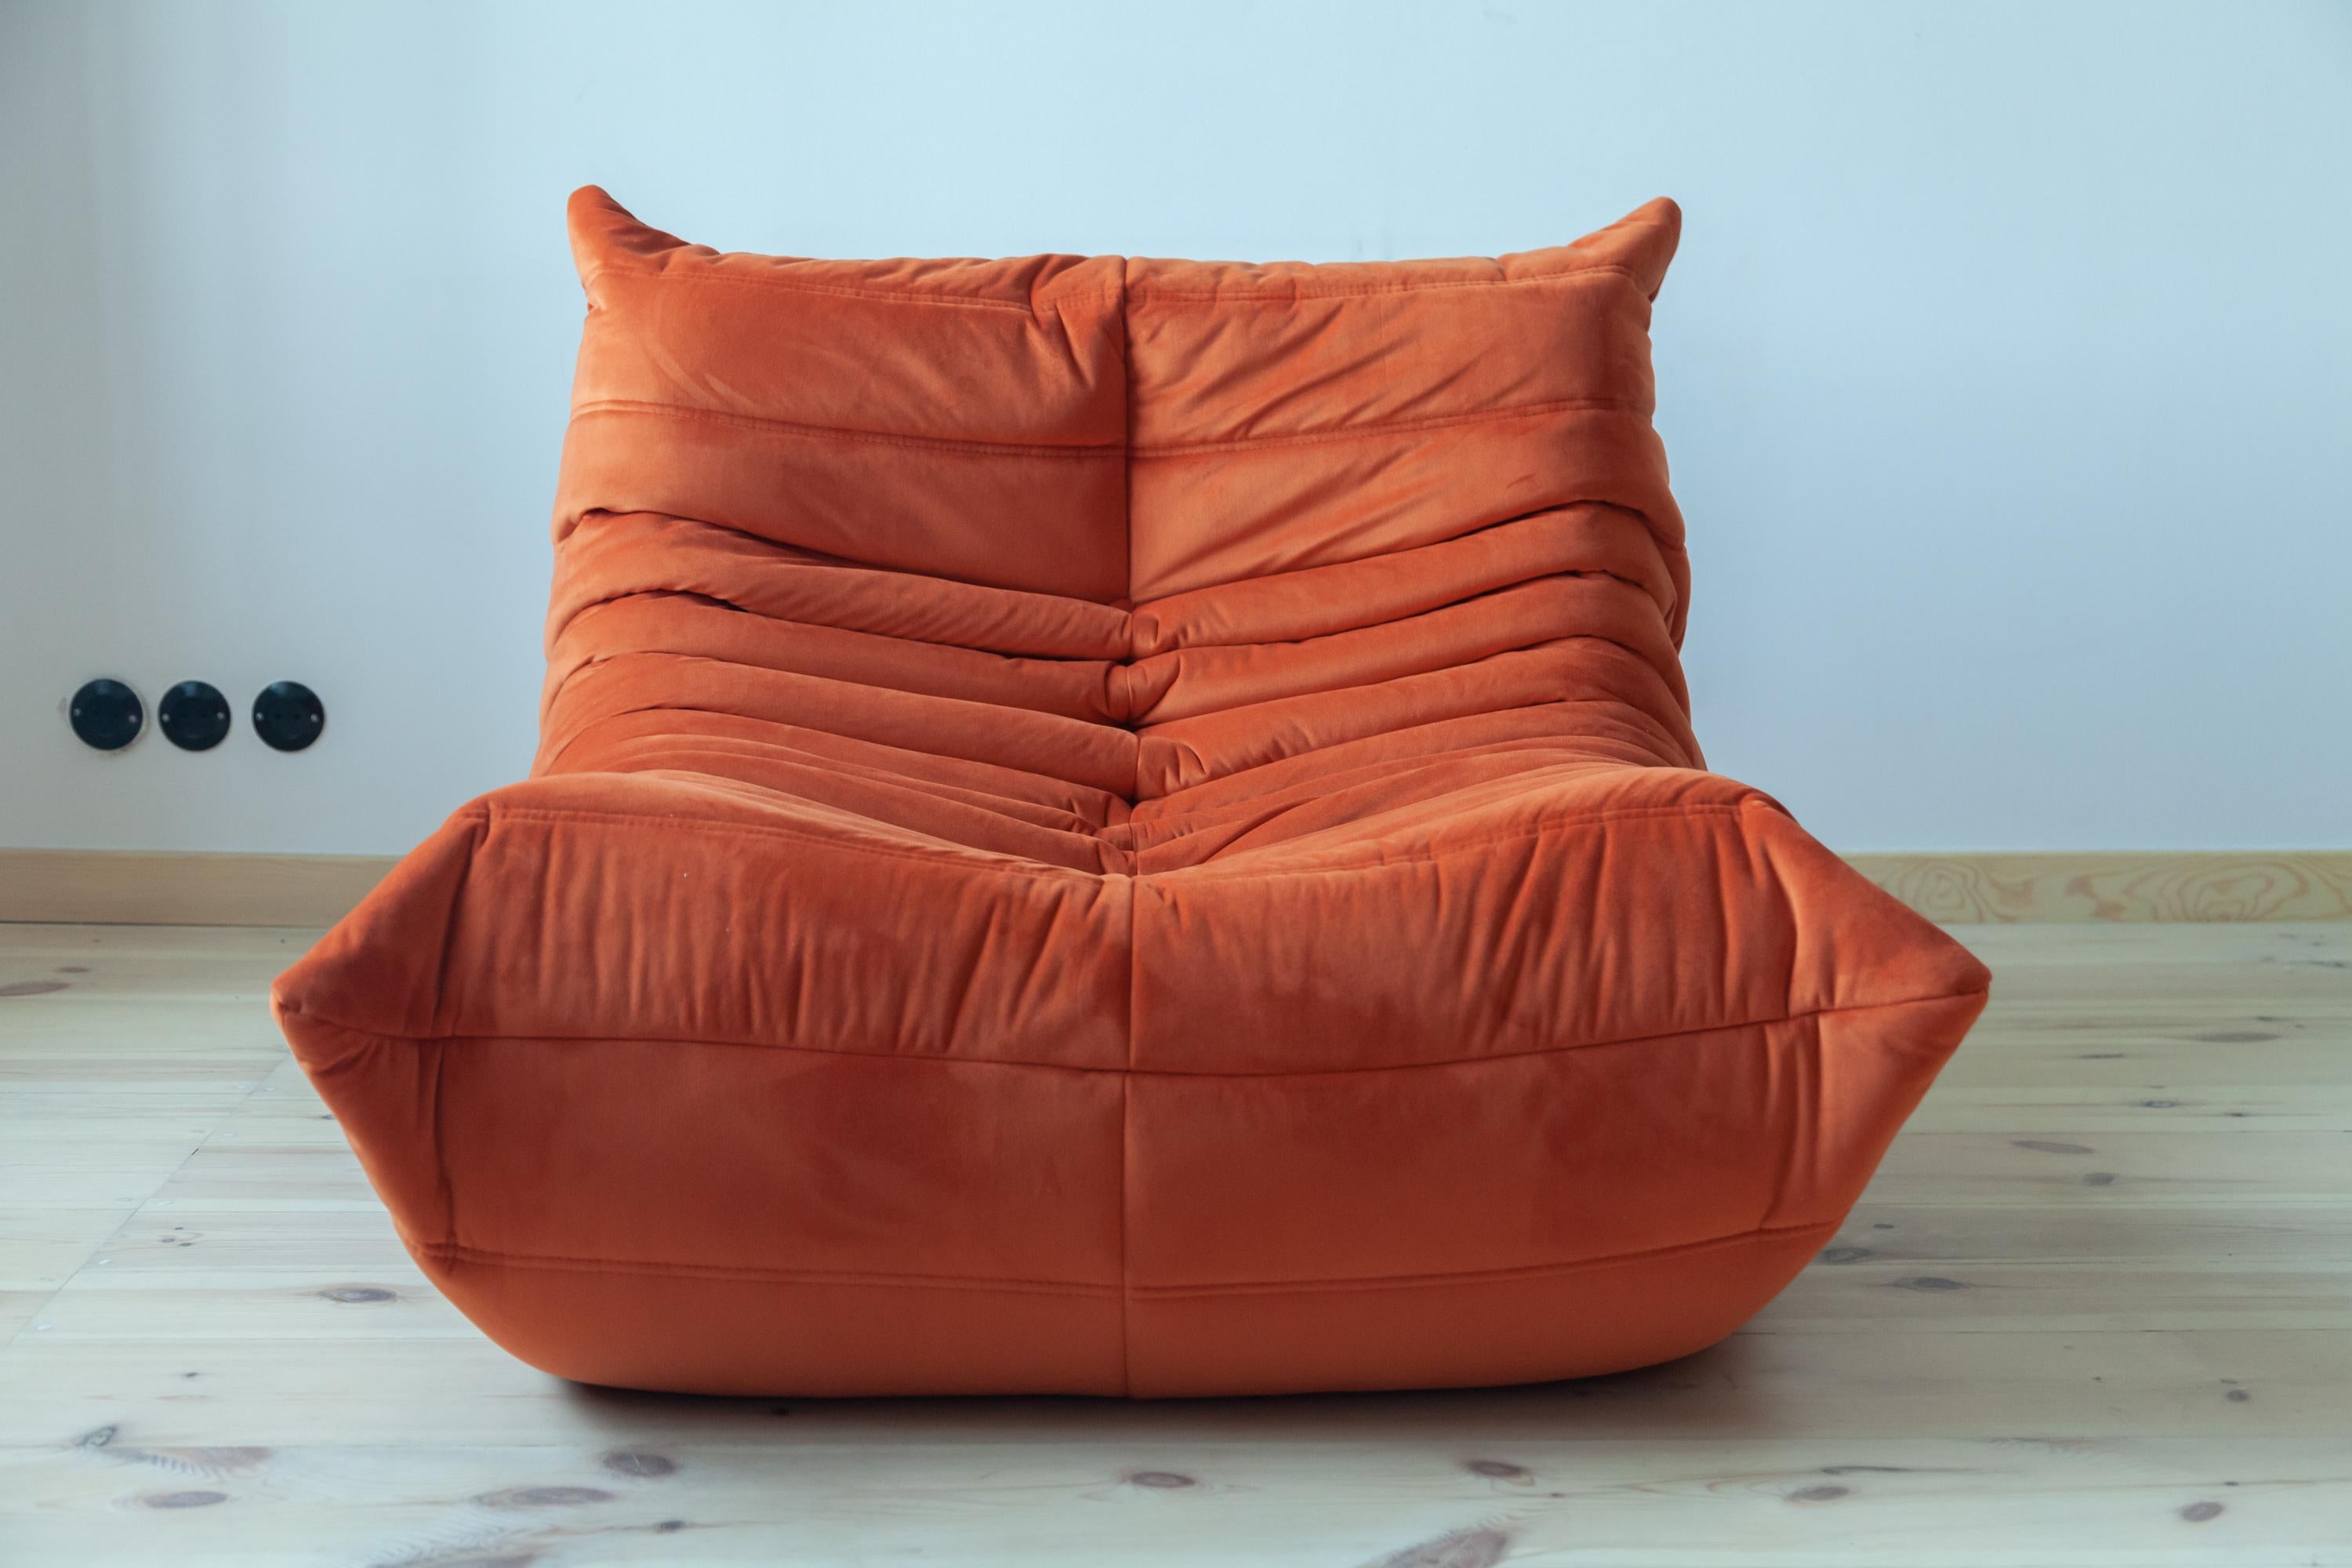 This Togo longue chair was designed by Michel Ducaroy in 1973 and was manufactured by Ligne Roset in France. It has been reupholstered in new orange velvet (70 x 87 x 102 cm). It has the original Ligne Roset logo and genuine Ligne Roset bottom.